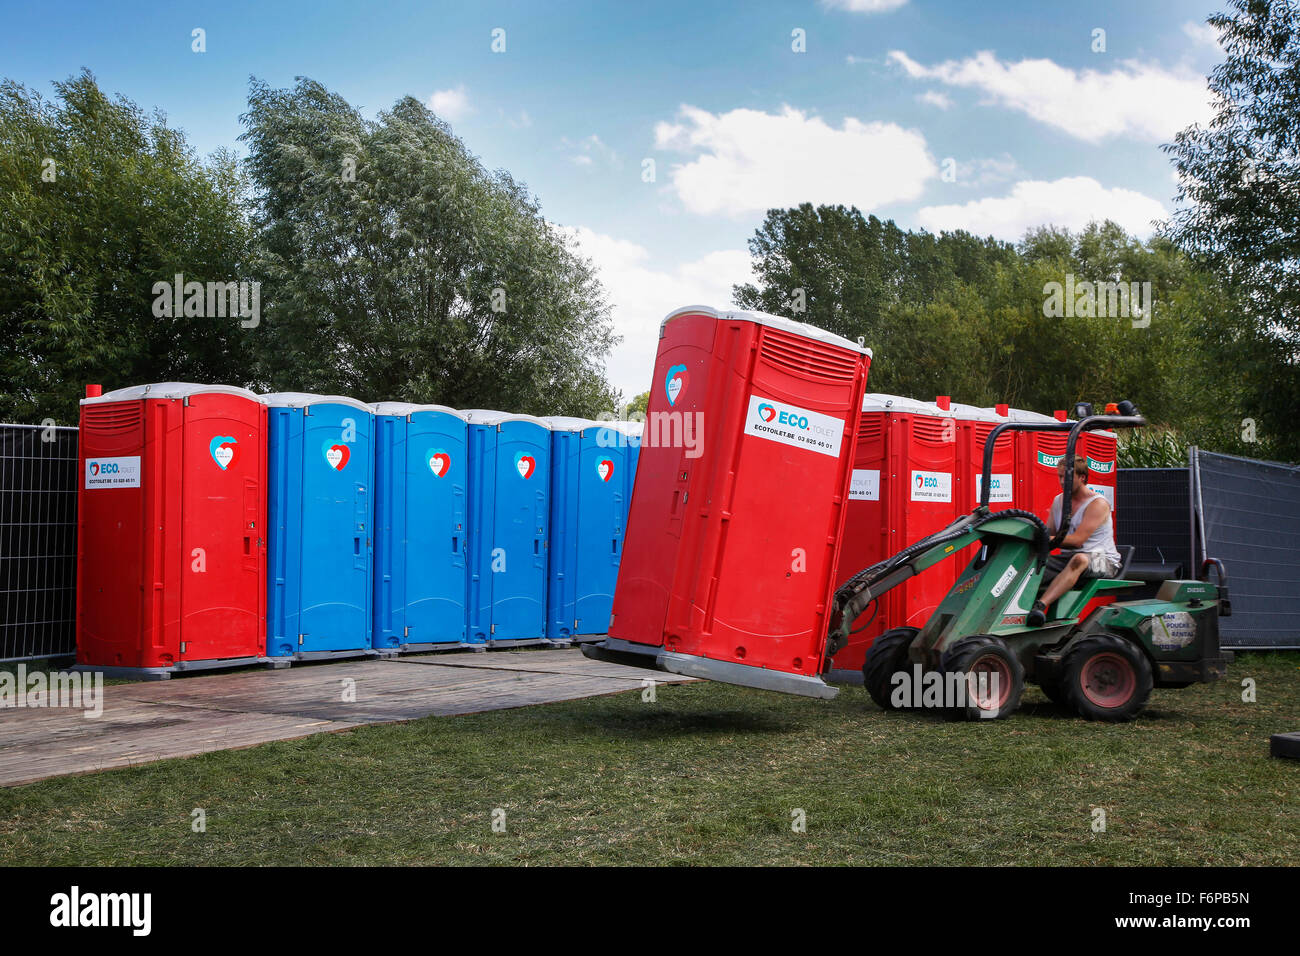 Placement of rows of colourful portable toilets at outdoor event Stock Photo